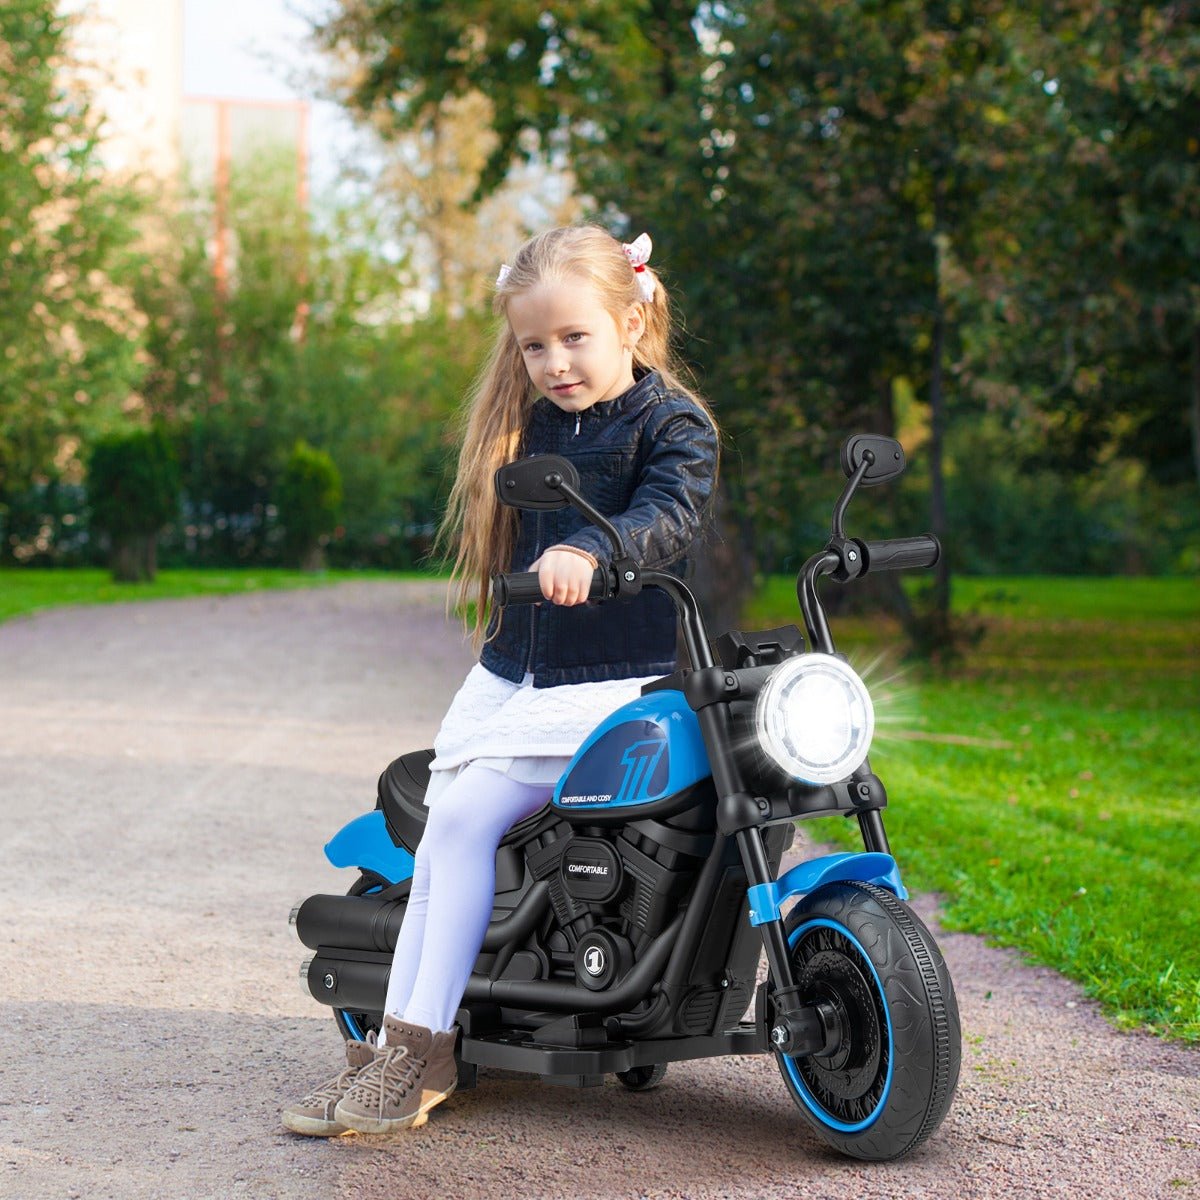 Twilight Rider: Kids Motorcycle with LED Lights